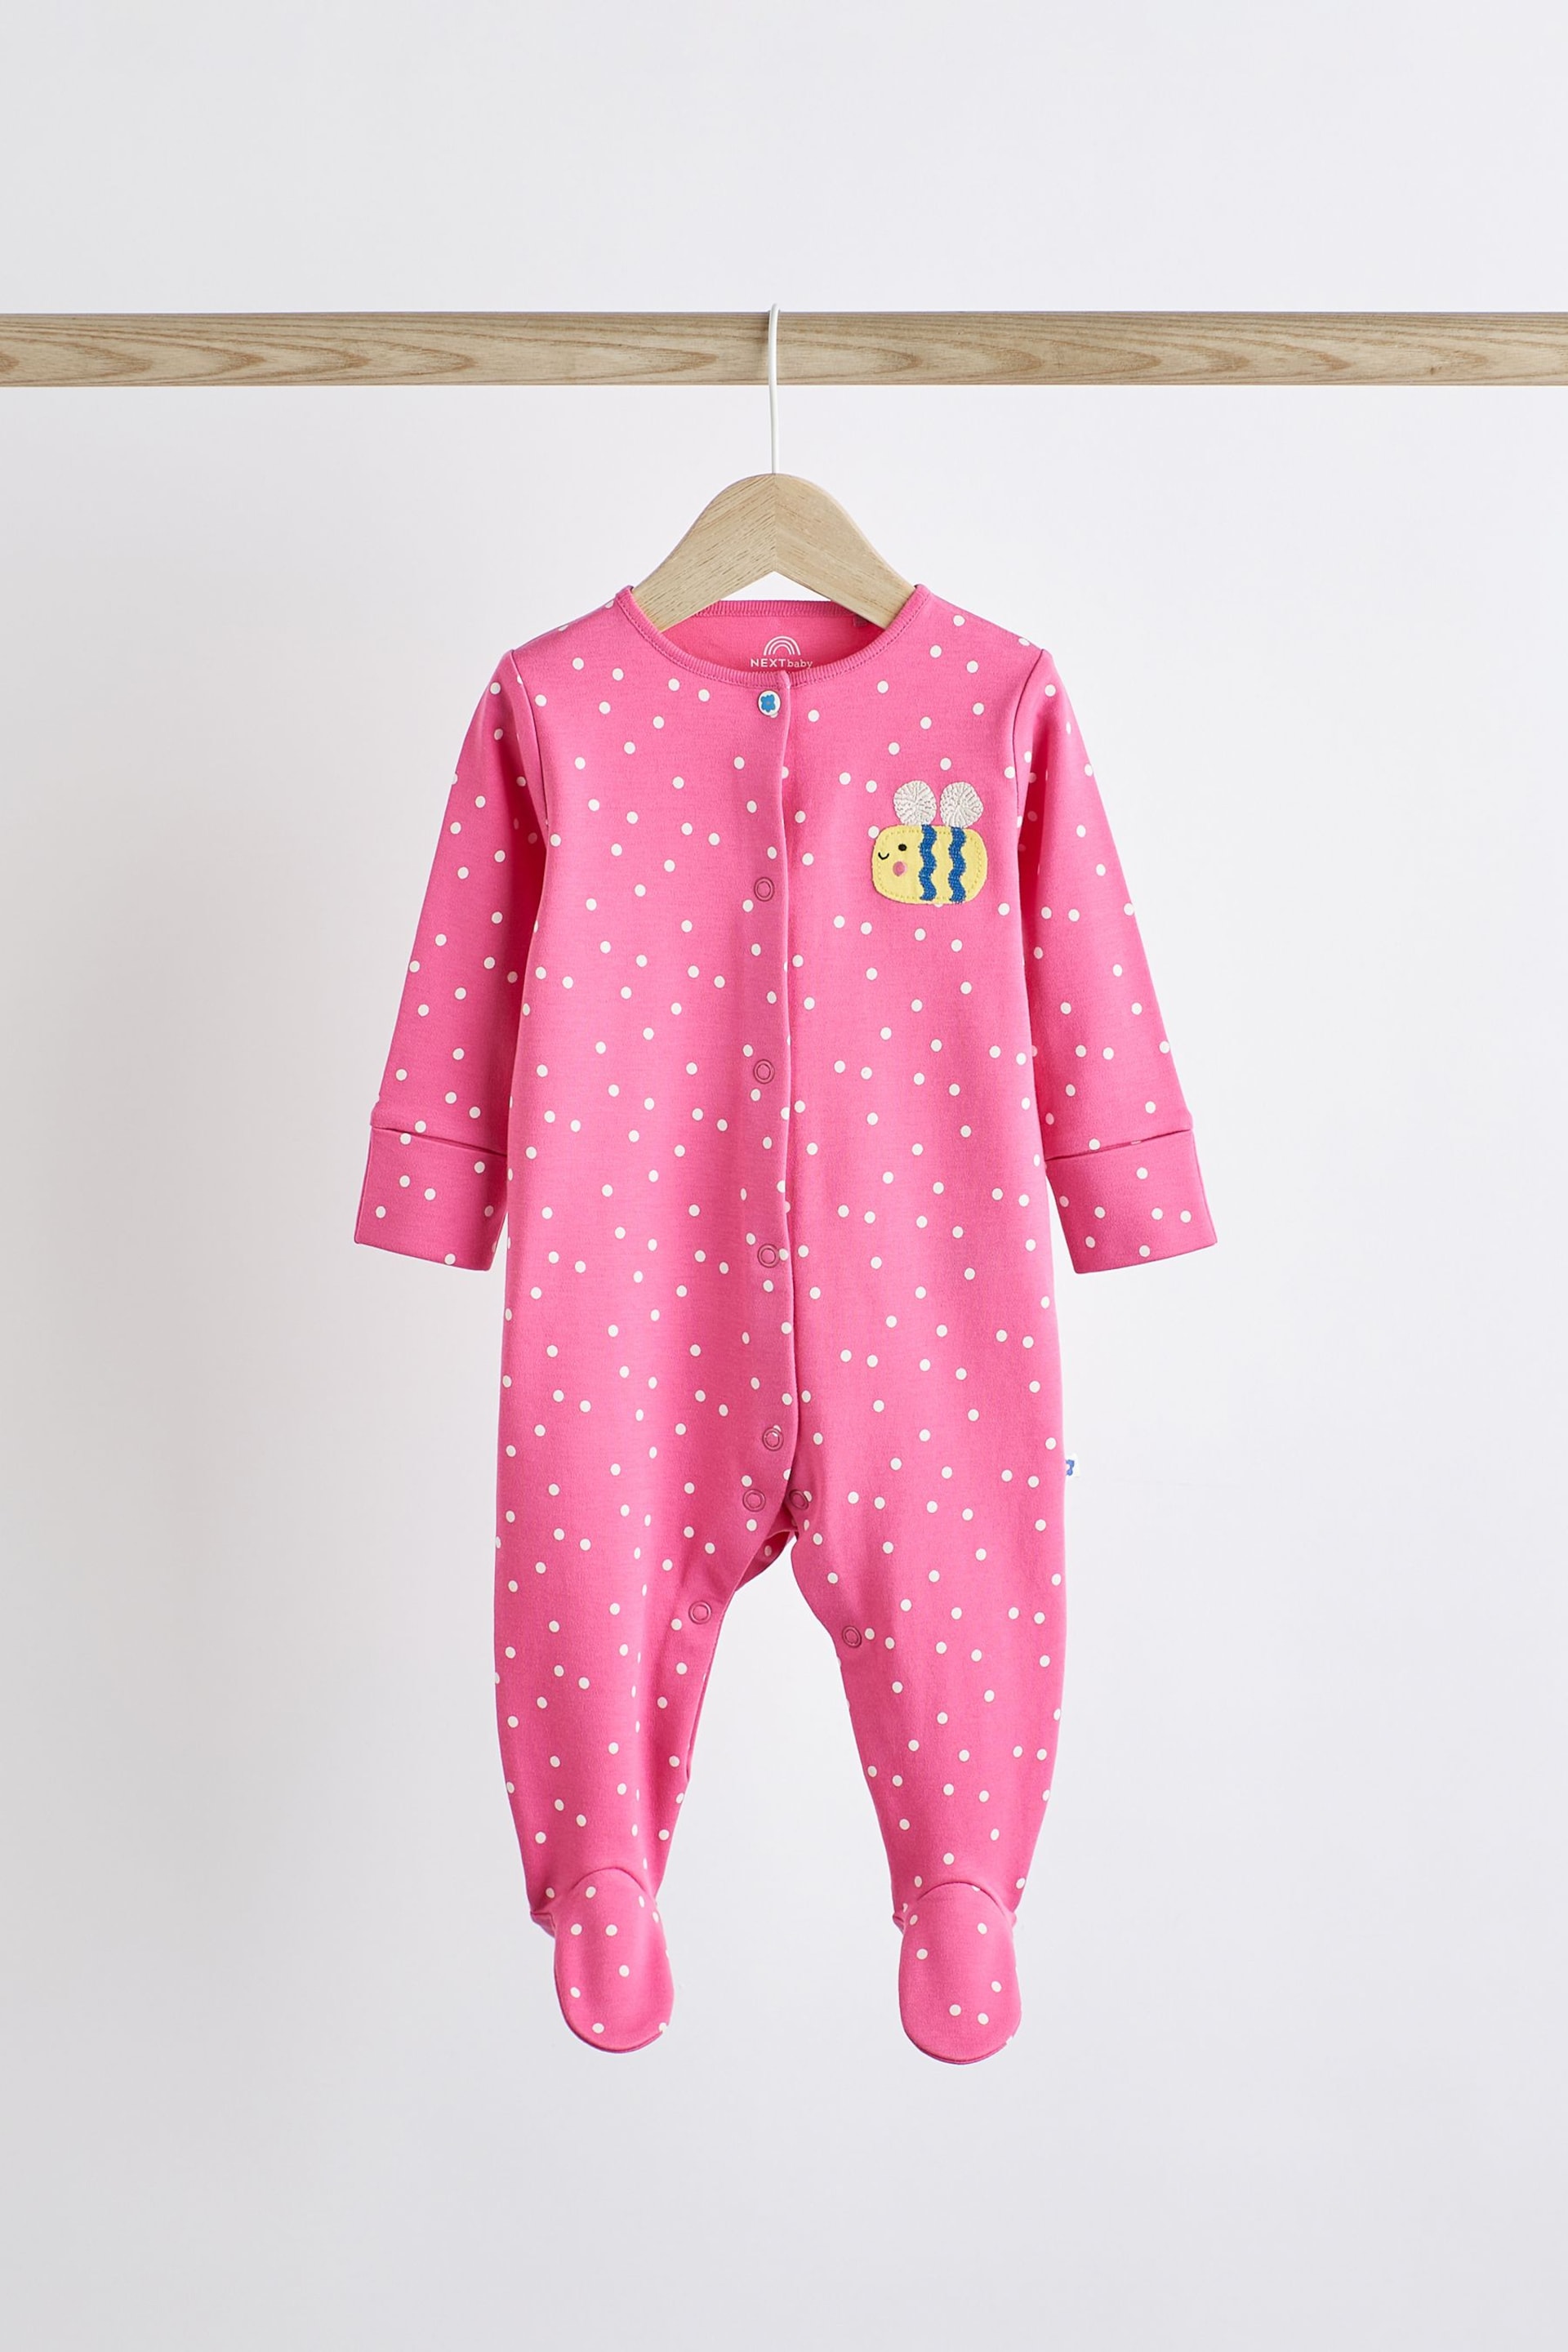 Multi Bright Baby 4 Pack Footed Sleepsuits (0-3yrs) - Image 4 of 13